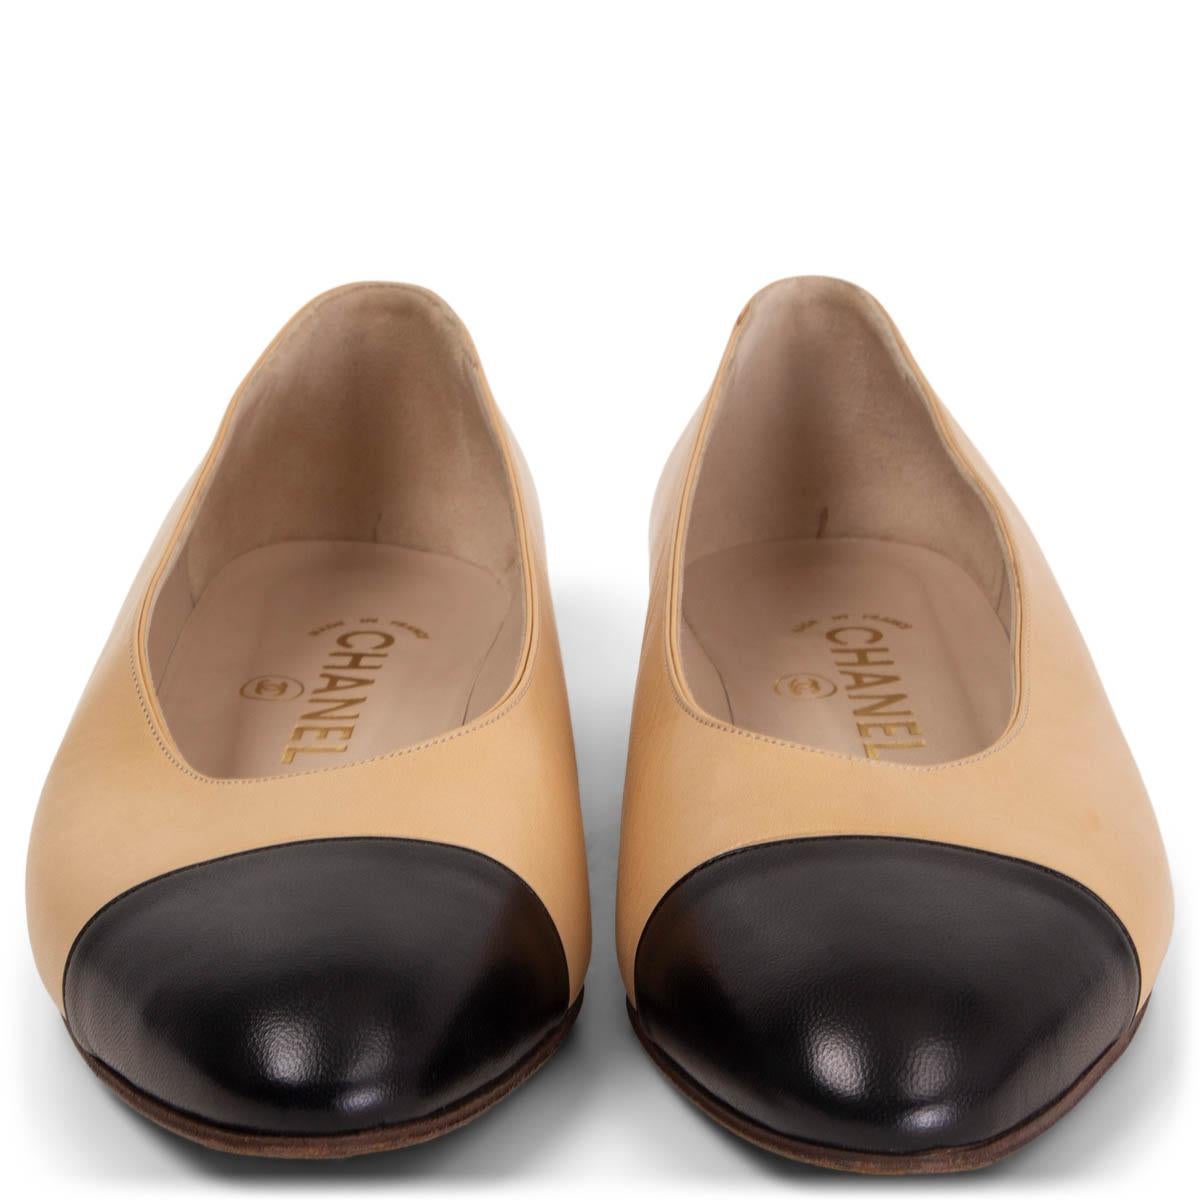 100% authentic Chanel Vintage ballet flats in beige calfskin with a black tip. Have been worn and are in excellent condition. 

Measurements
Imprinted Size	38
Shoe Size	38
Inside Sole	24.5cm (9.6in)
Width	7.5cm (2.9in)
Heel	1.5cm (0.6in)

All our